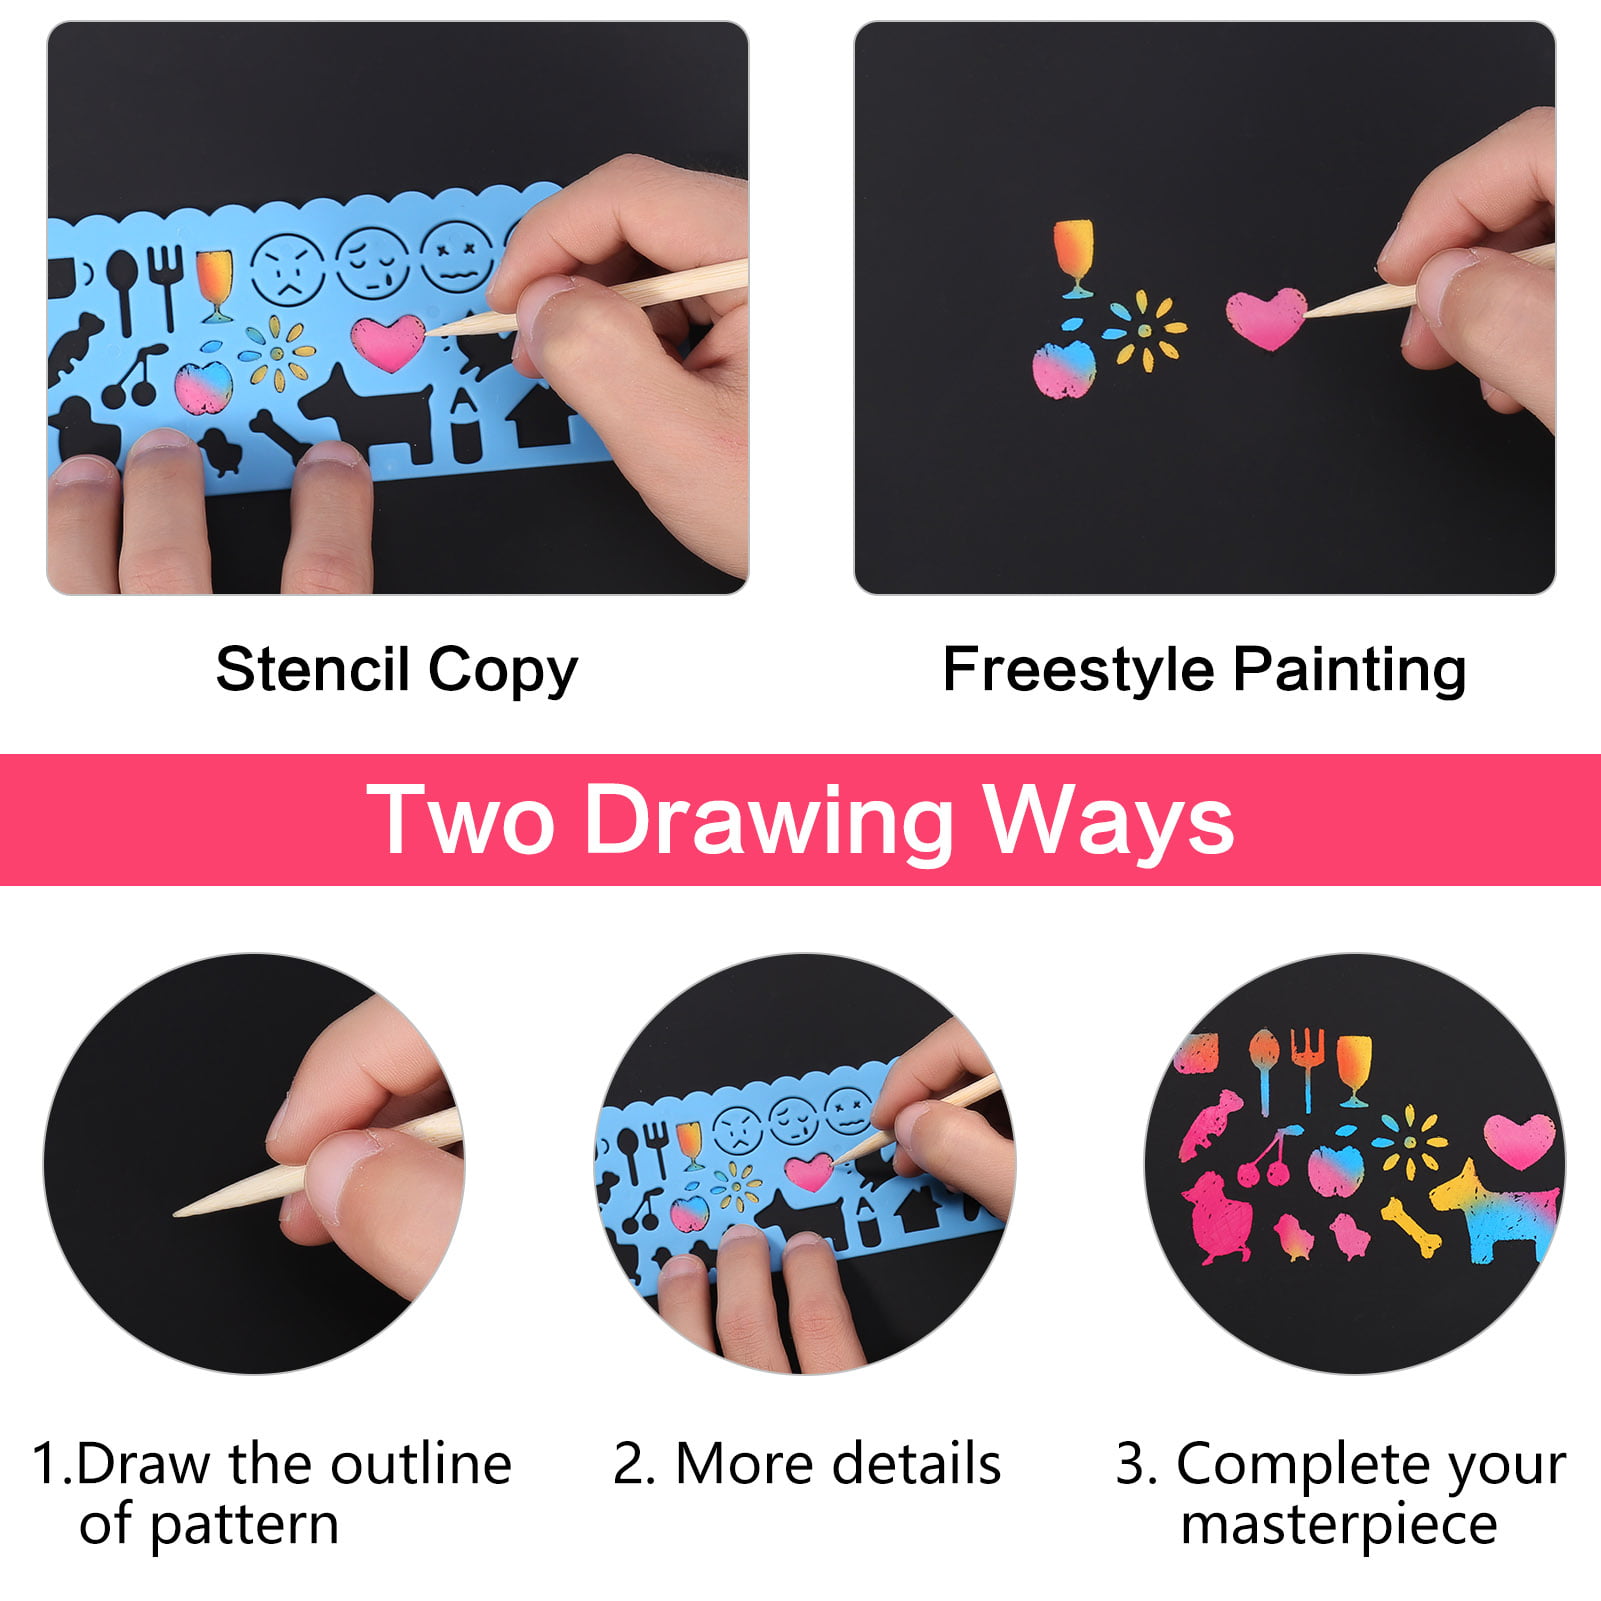 Wholesale Magic Scratch Art Book Rainbow Scratch Printable Vinyl Sticker  Paper Notebook With Wooden Stylus Kids Notes Boards Christmas Birthday  Party Game Favor 10.3X7.5 Inch From Jessie06, $2.75